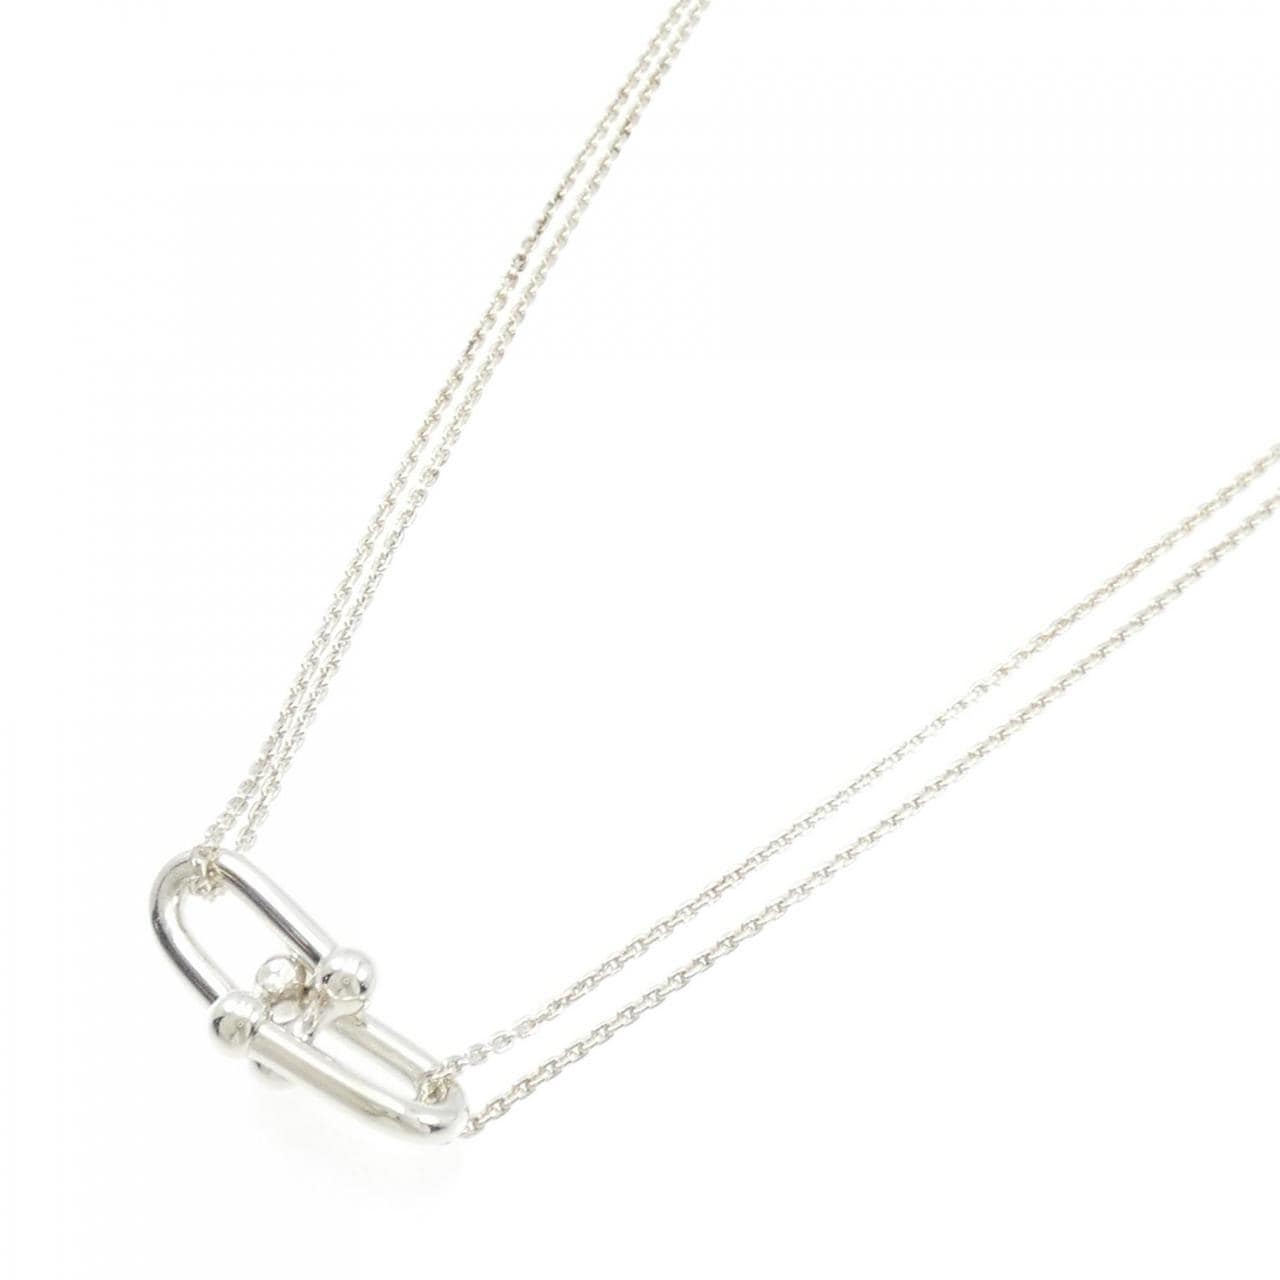 TIFFANY double link necklace